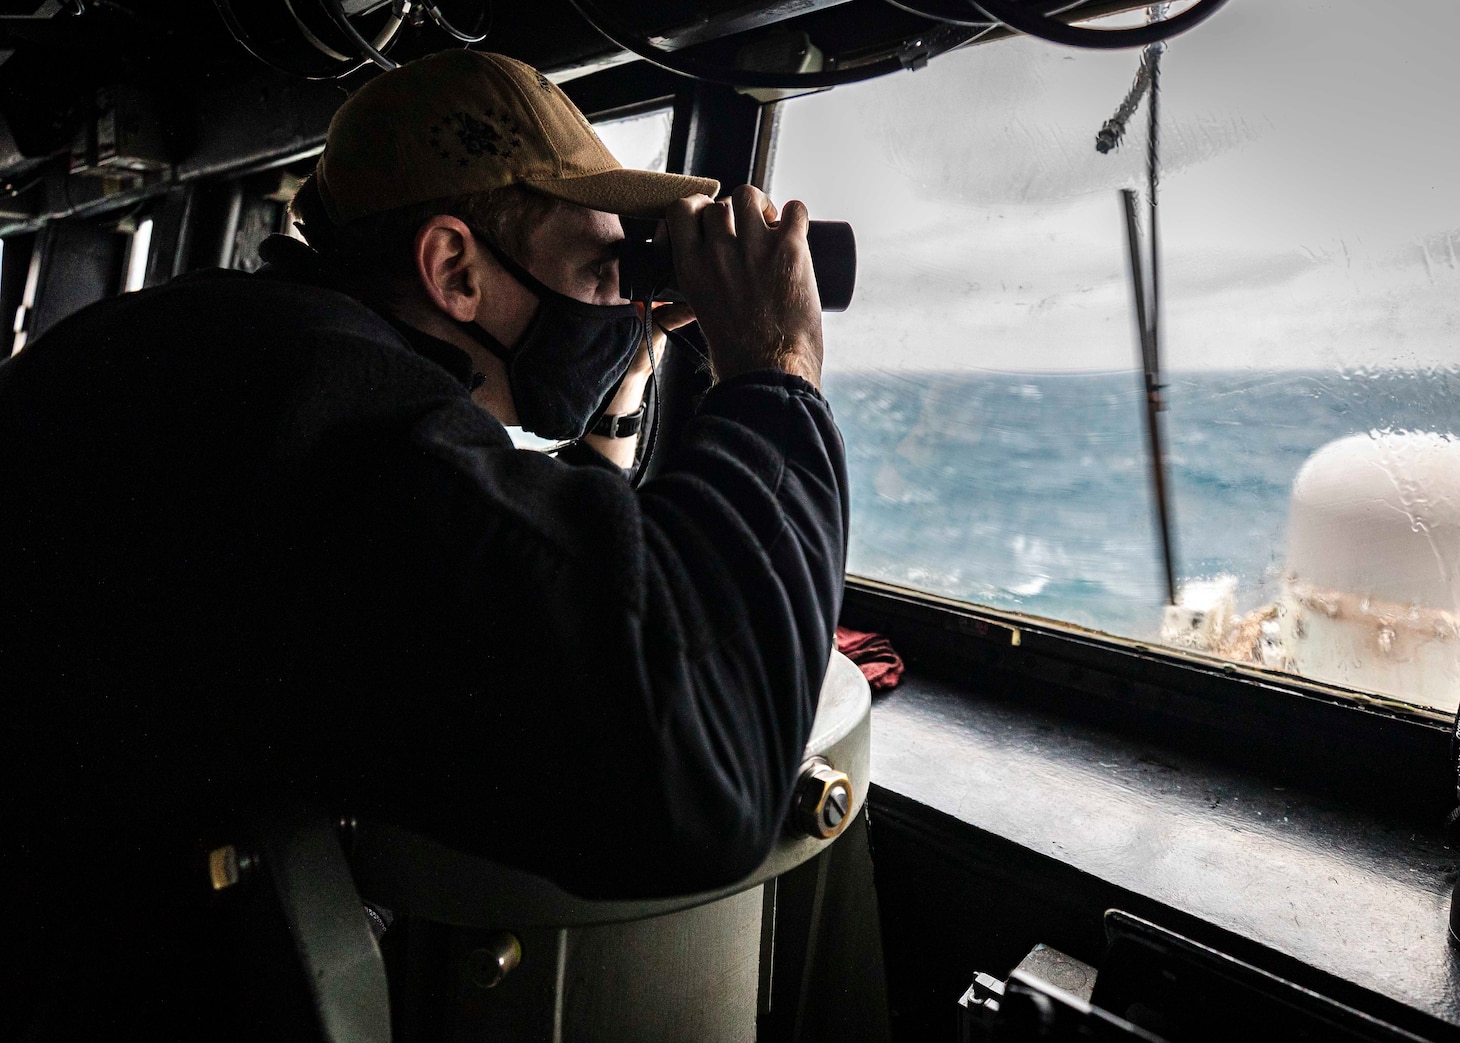 SOUTH CHINA SEA (Dec. 30, 2020) Ensign Grayson Sigler, from Corpus Christi, Texas, scans the horizon while standing watch in the pilot house as guided-missile destroyer USS John S. McCain (DDG 56) conducts routine underway operations in support of stability and security for a free and open Indo-Pacific. Sea control is foundational for all other naval missions that support the Joint Force, including power projection.